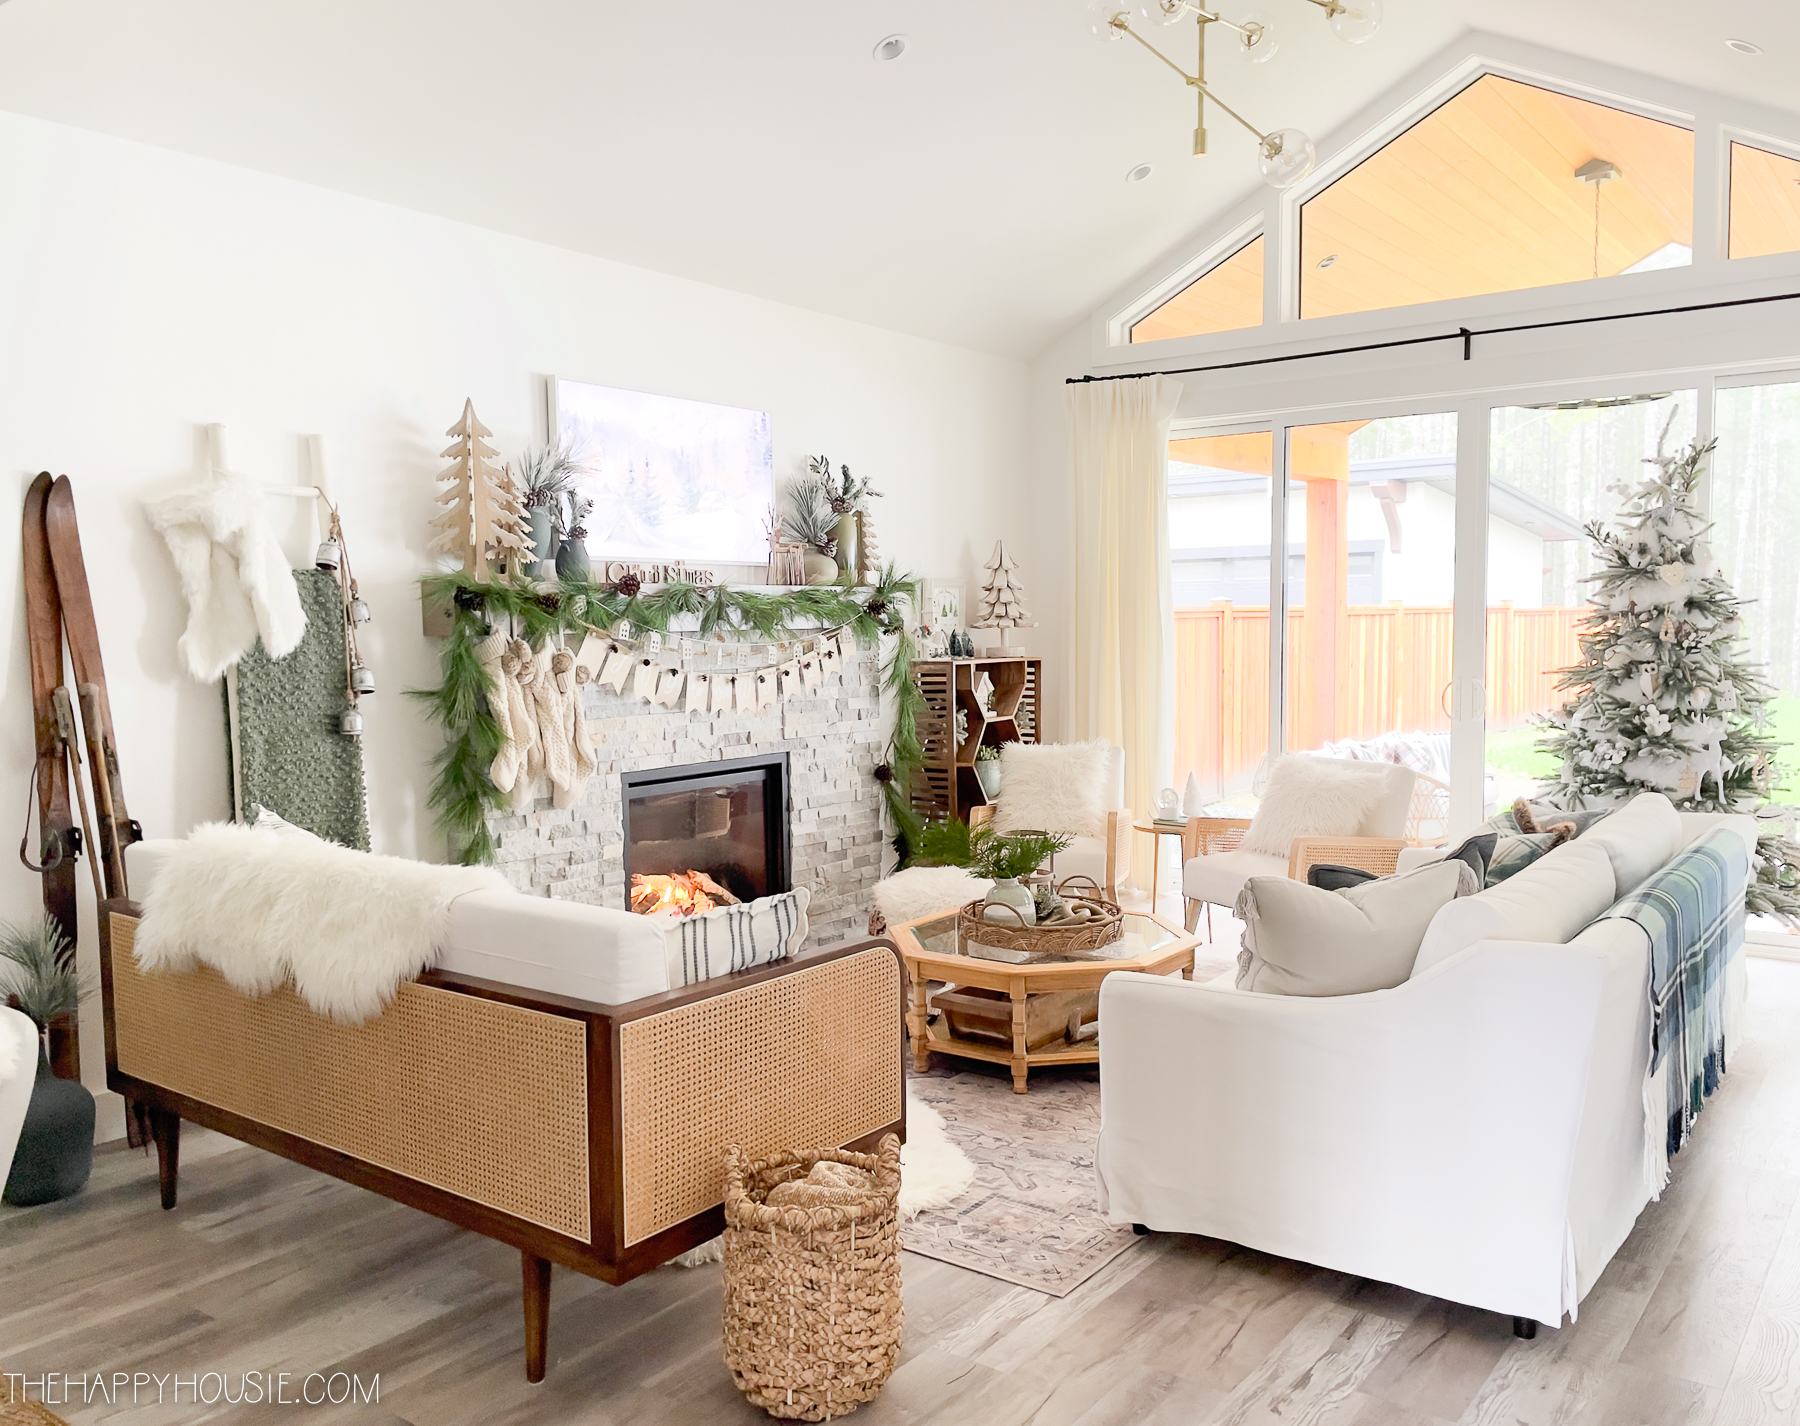 A cozy living room with white faux fur and blankets.